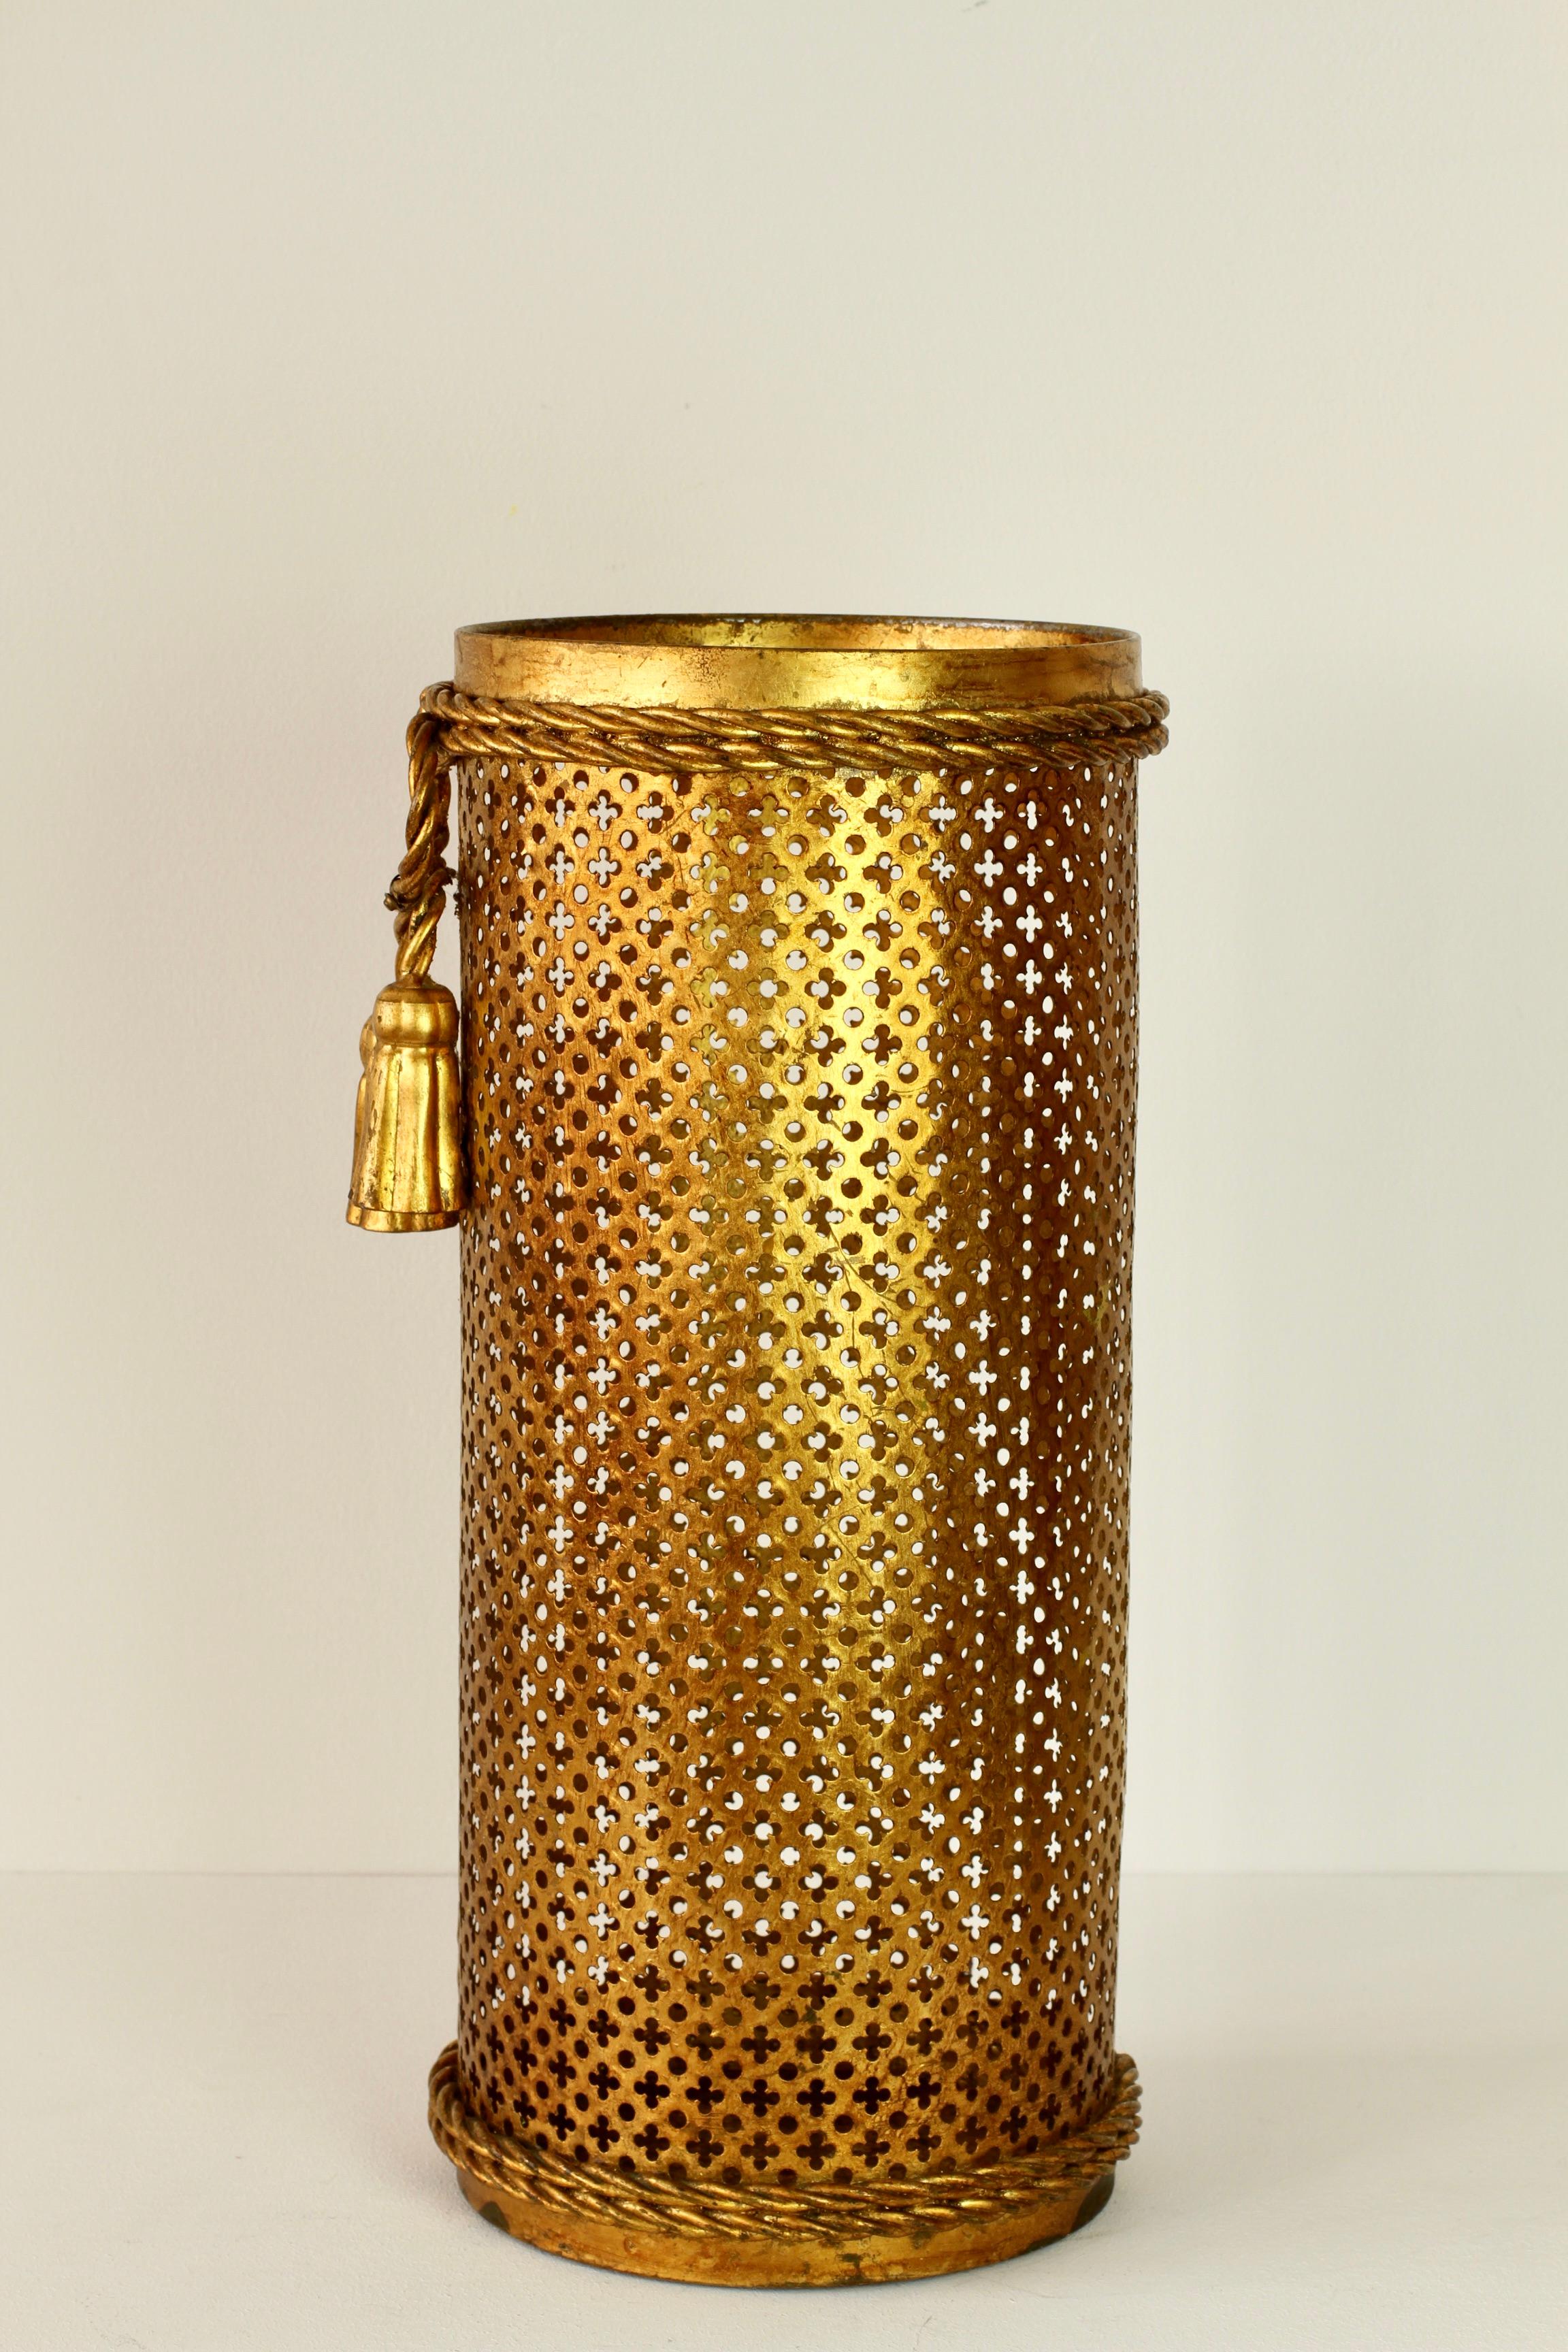 Midcentury Italian Hollywood Regency Gold Gilded Umbrella Stand or Holder, 1950s For Sale 4